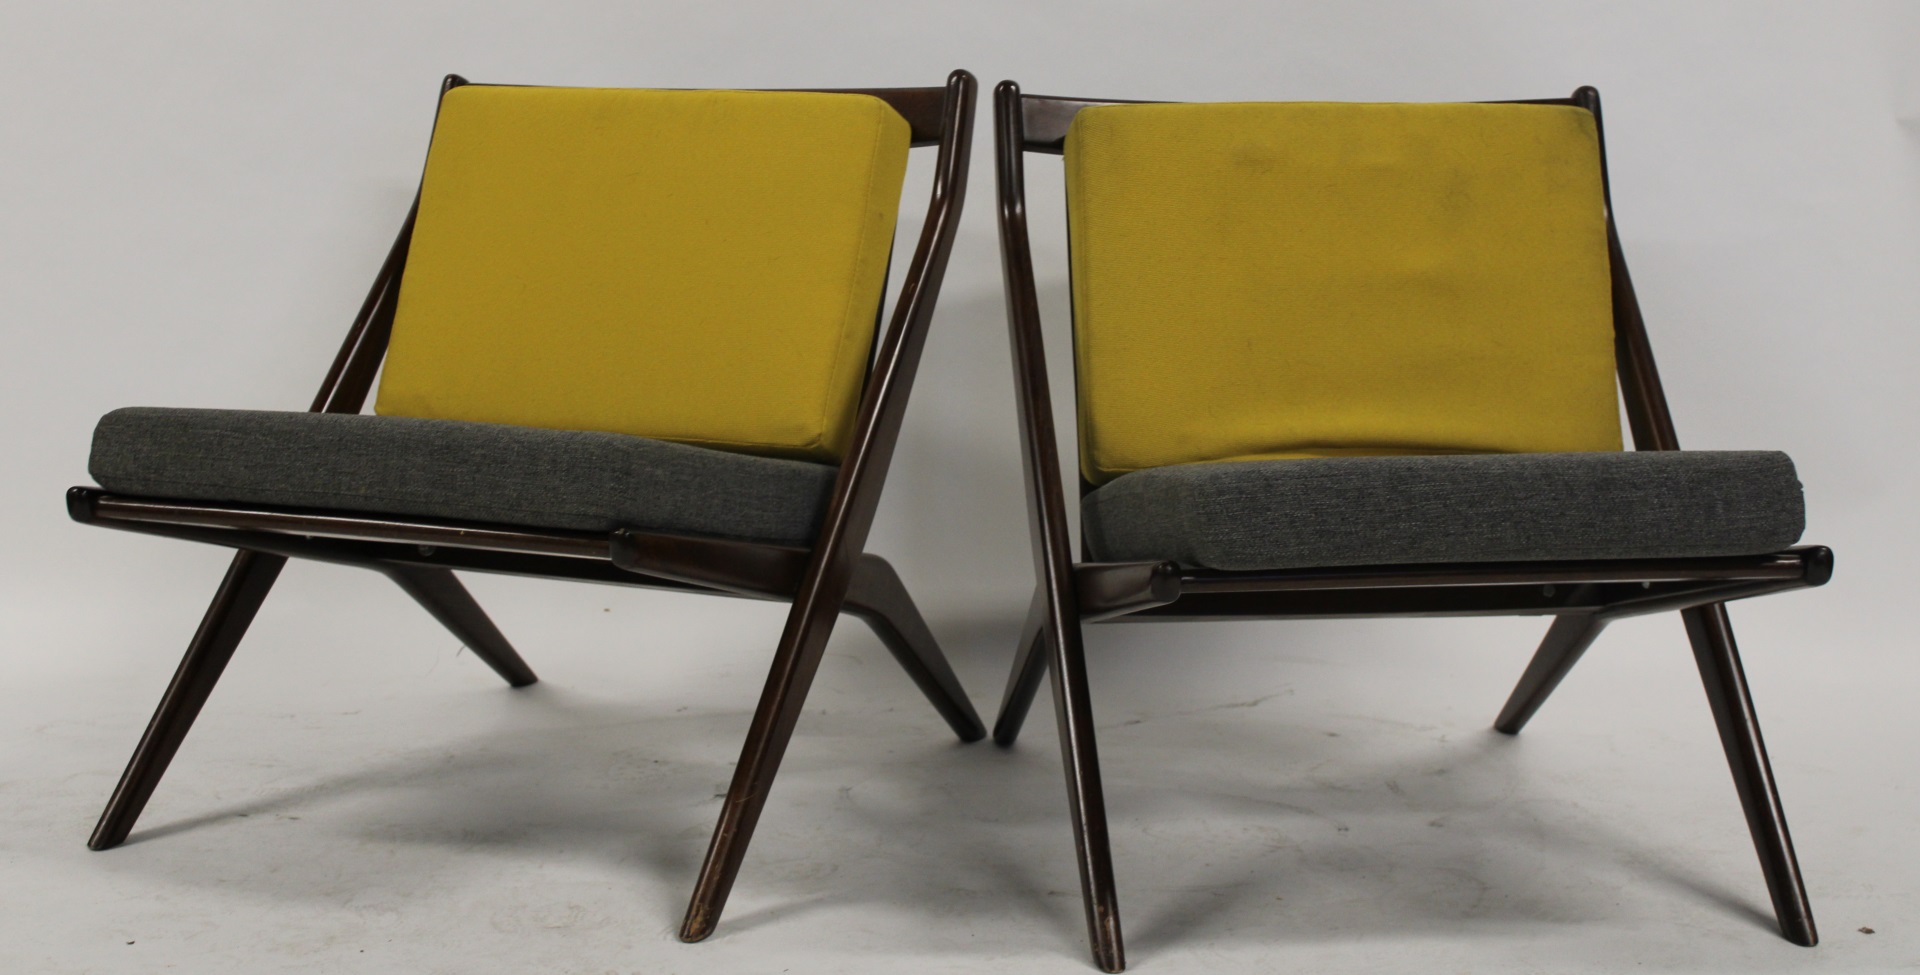 MIDCENTURY DUX SIGNED X FRAME CHAIRS 3bbf56